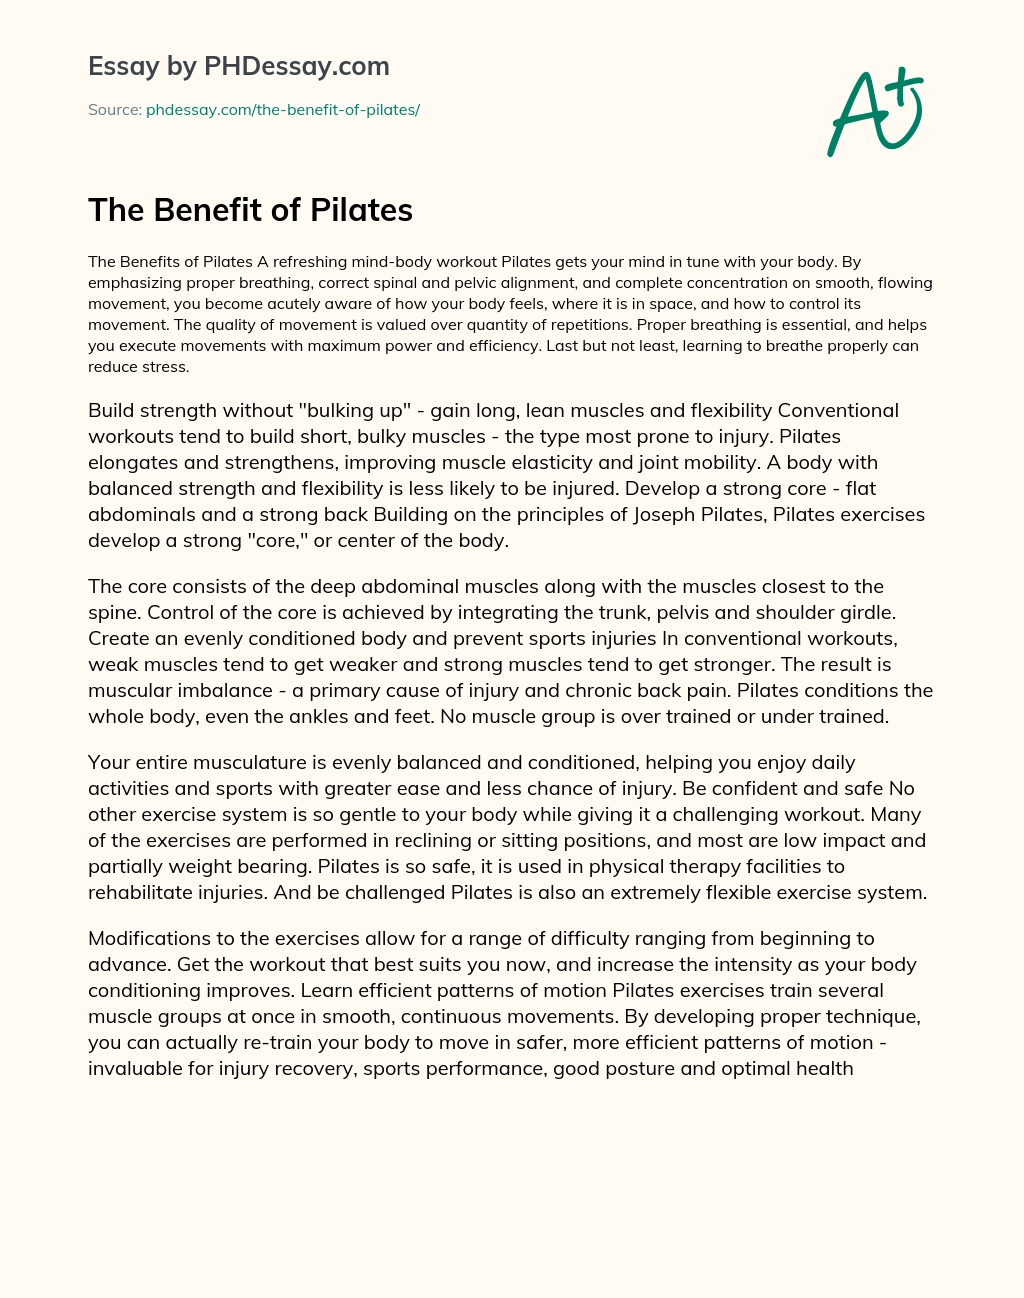 The Benefit of Pilates essay